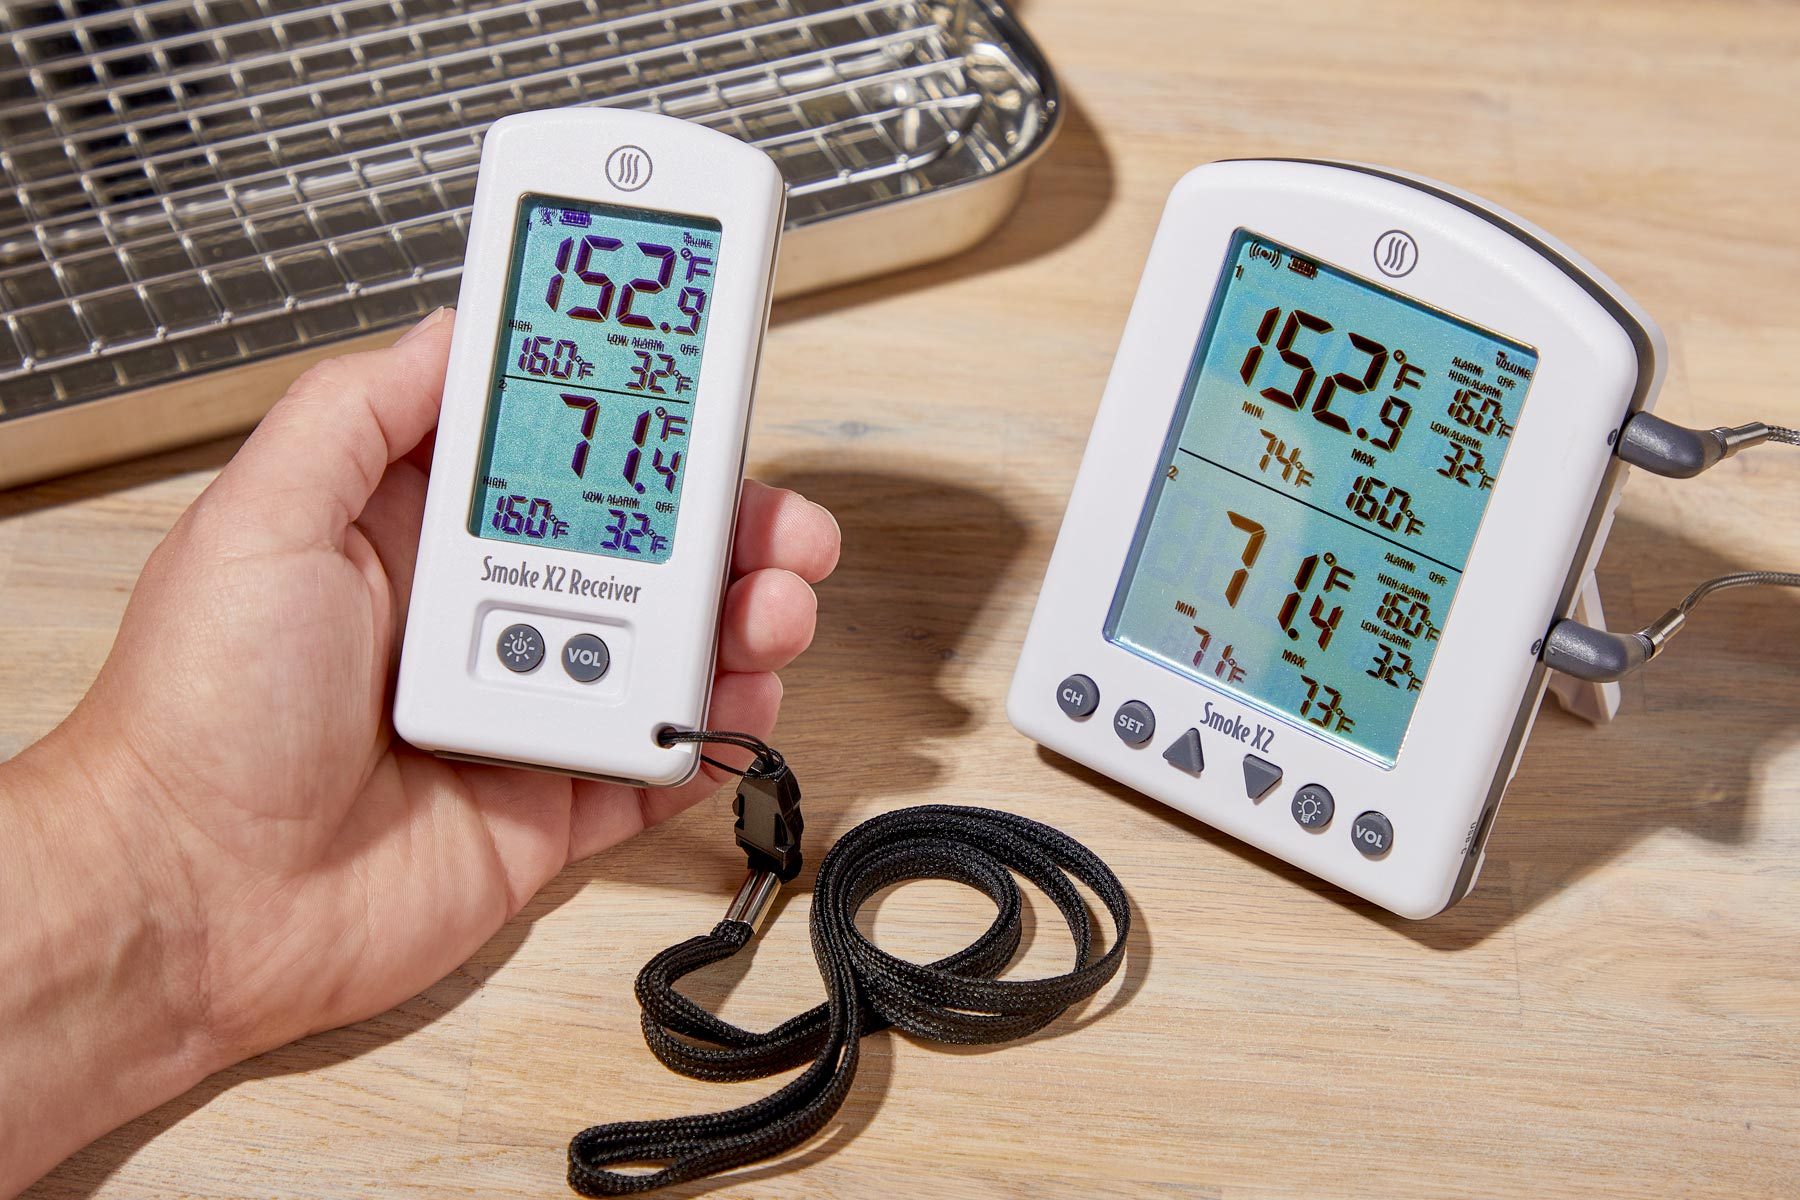 Hygrometer and Thermometer by ThermoWorks